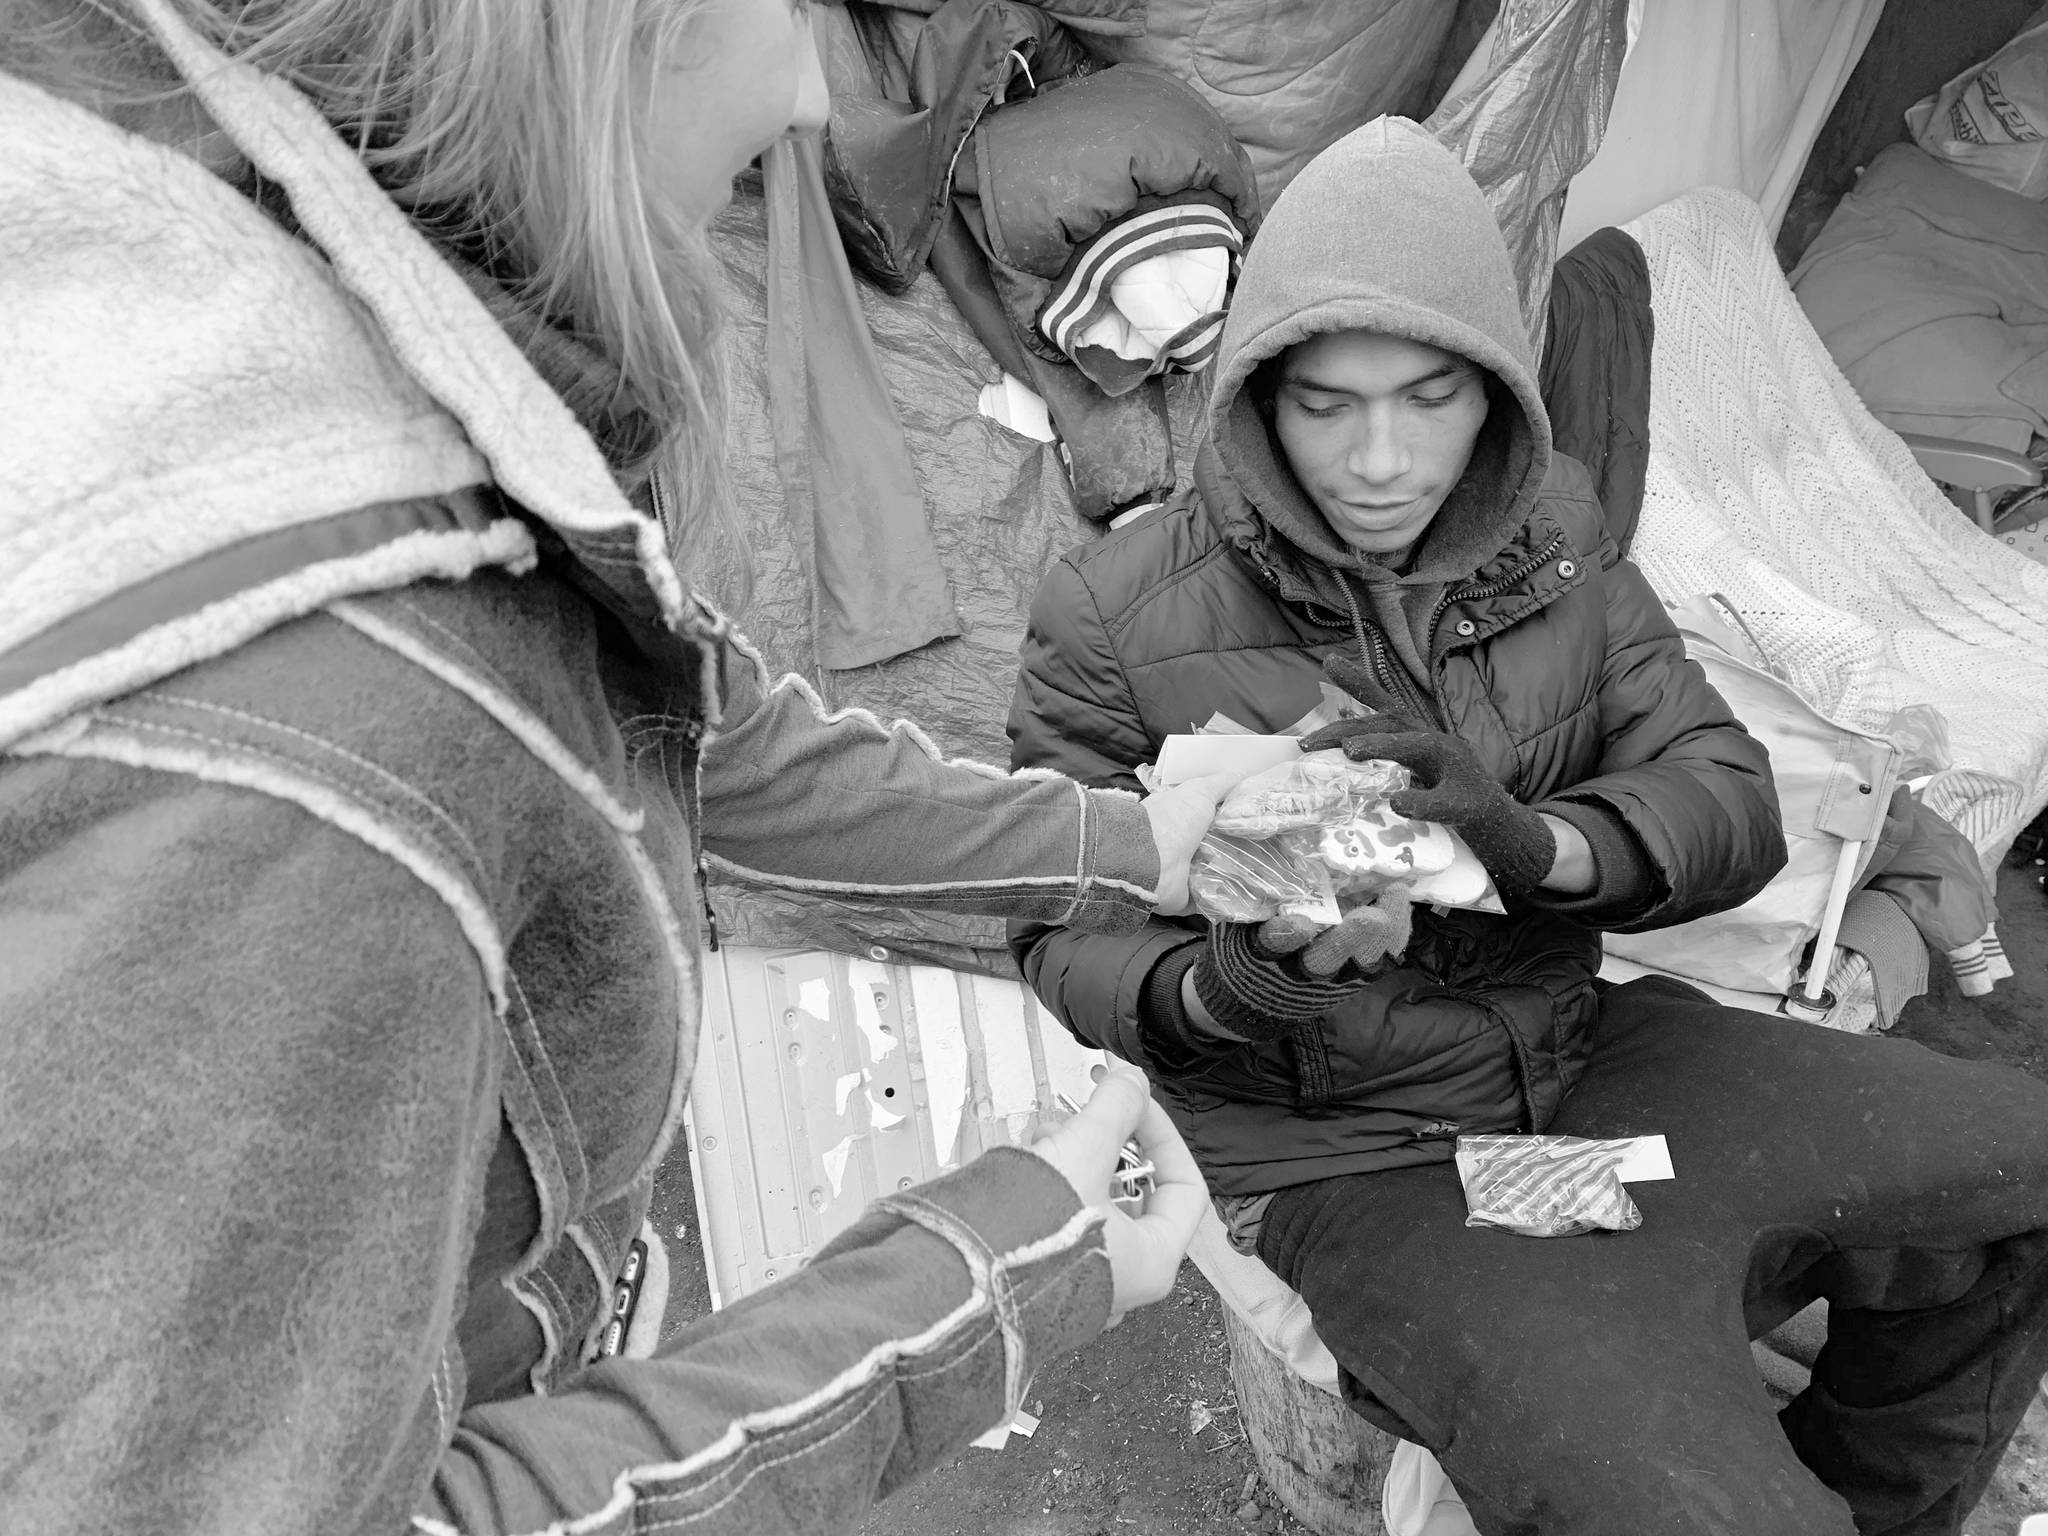 In this Dec. 13 photo, Kristina Tester, left, hands out cookies made by high school students to residents of a homeless camp made up mainly of Native Americans in south Minneapolis. Tester, who is both a medical student and a law student at the University of Minnesota, grew up near the camp. She began helping at the camp this summer as part of an elective rotation with the Native American Community Clinic in Minneapolis, and continues to volunteer. (AP Photo/Jeff Baenen)